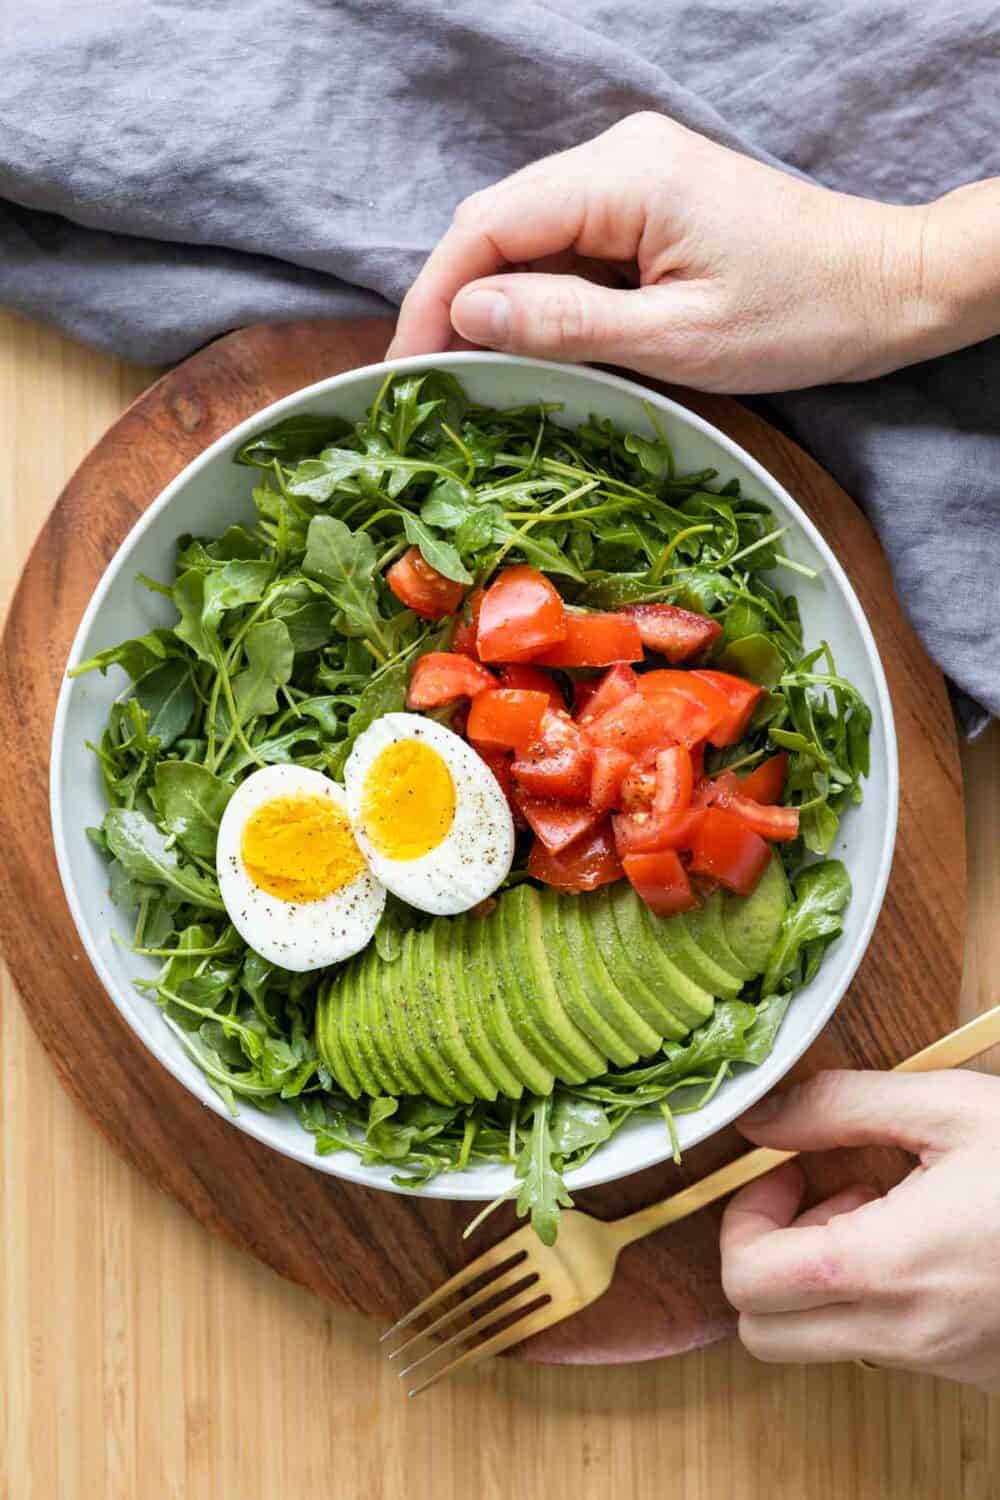 Breakfast salad in a white salad bowl held by hands.